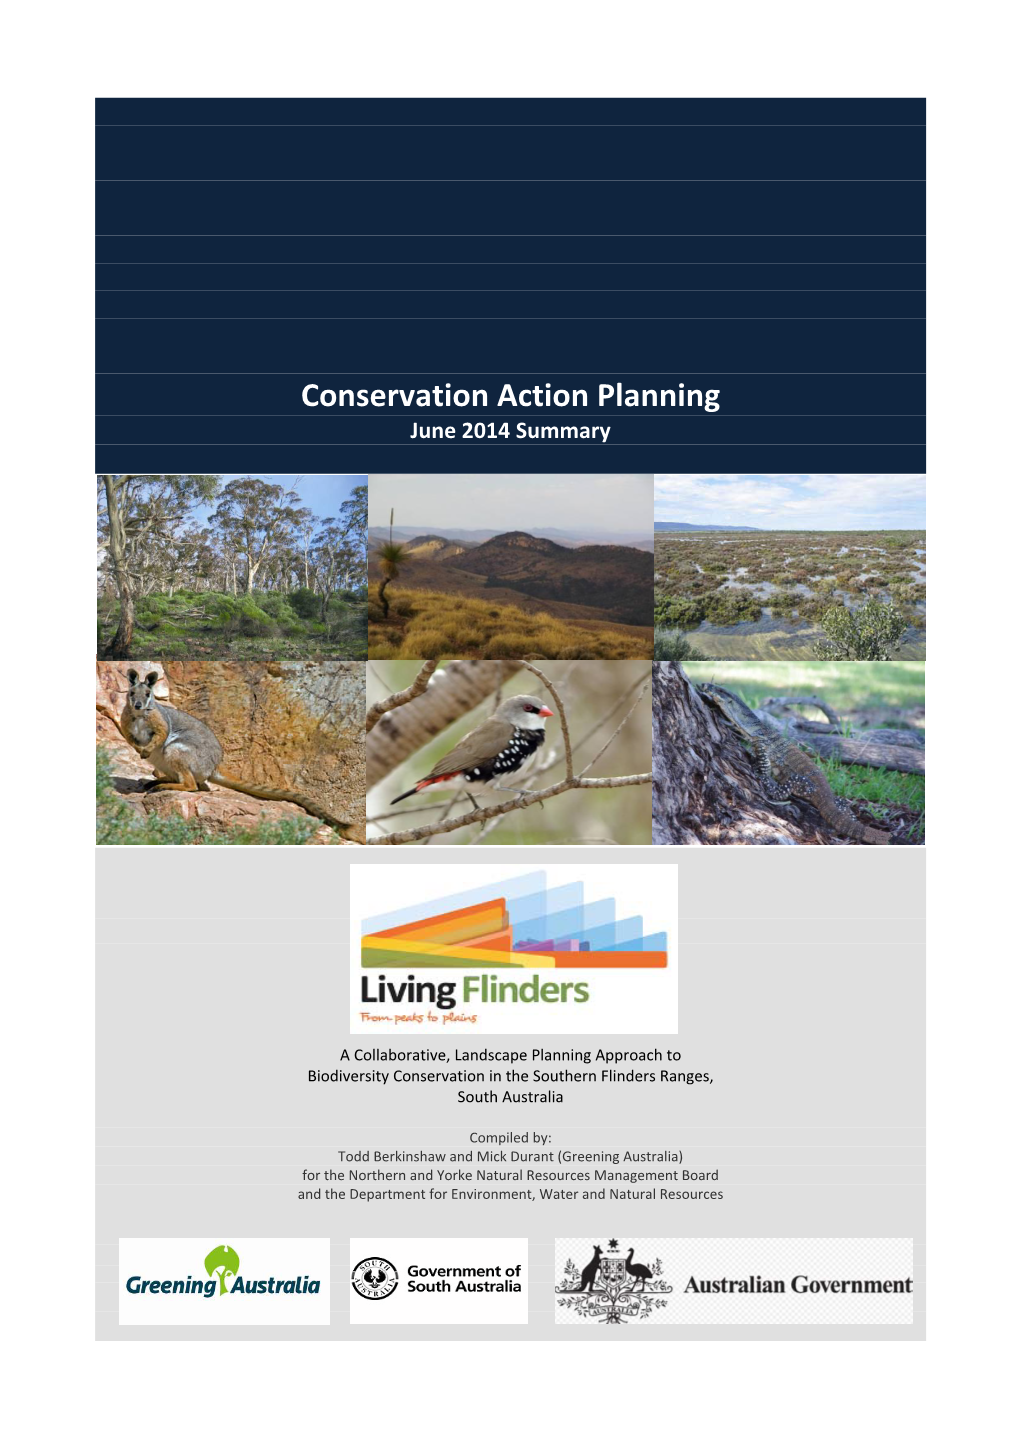 Conservation Action Planning June 2014 Summary